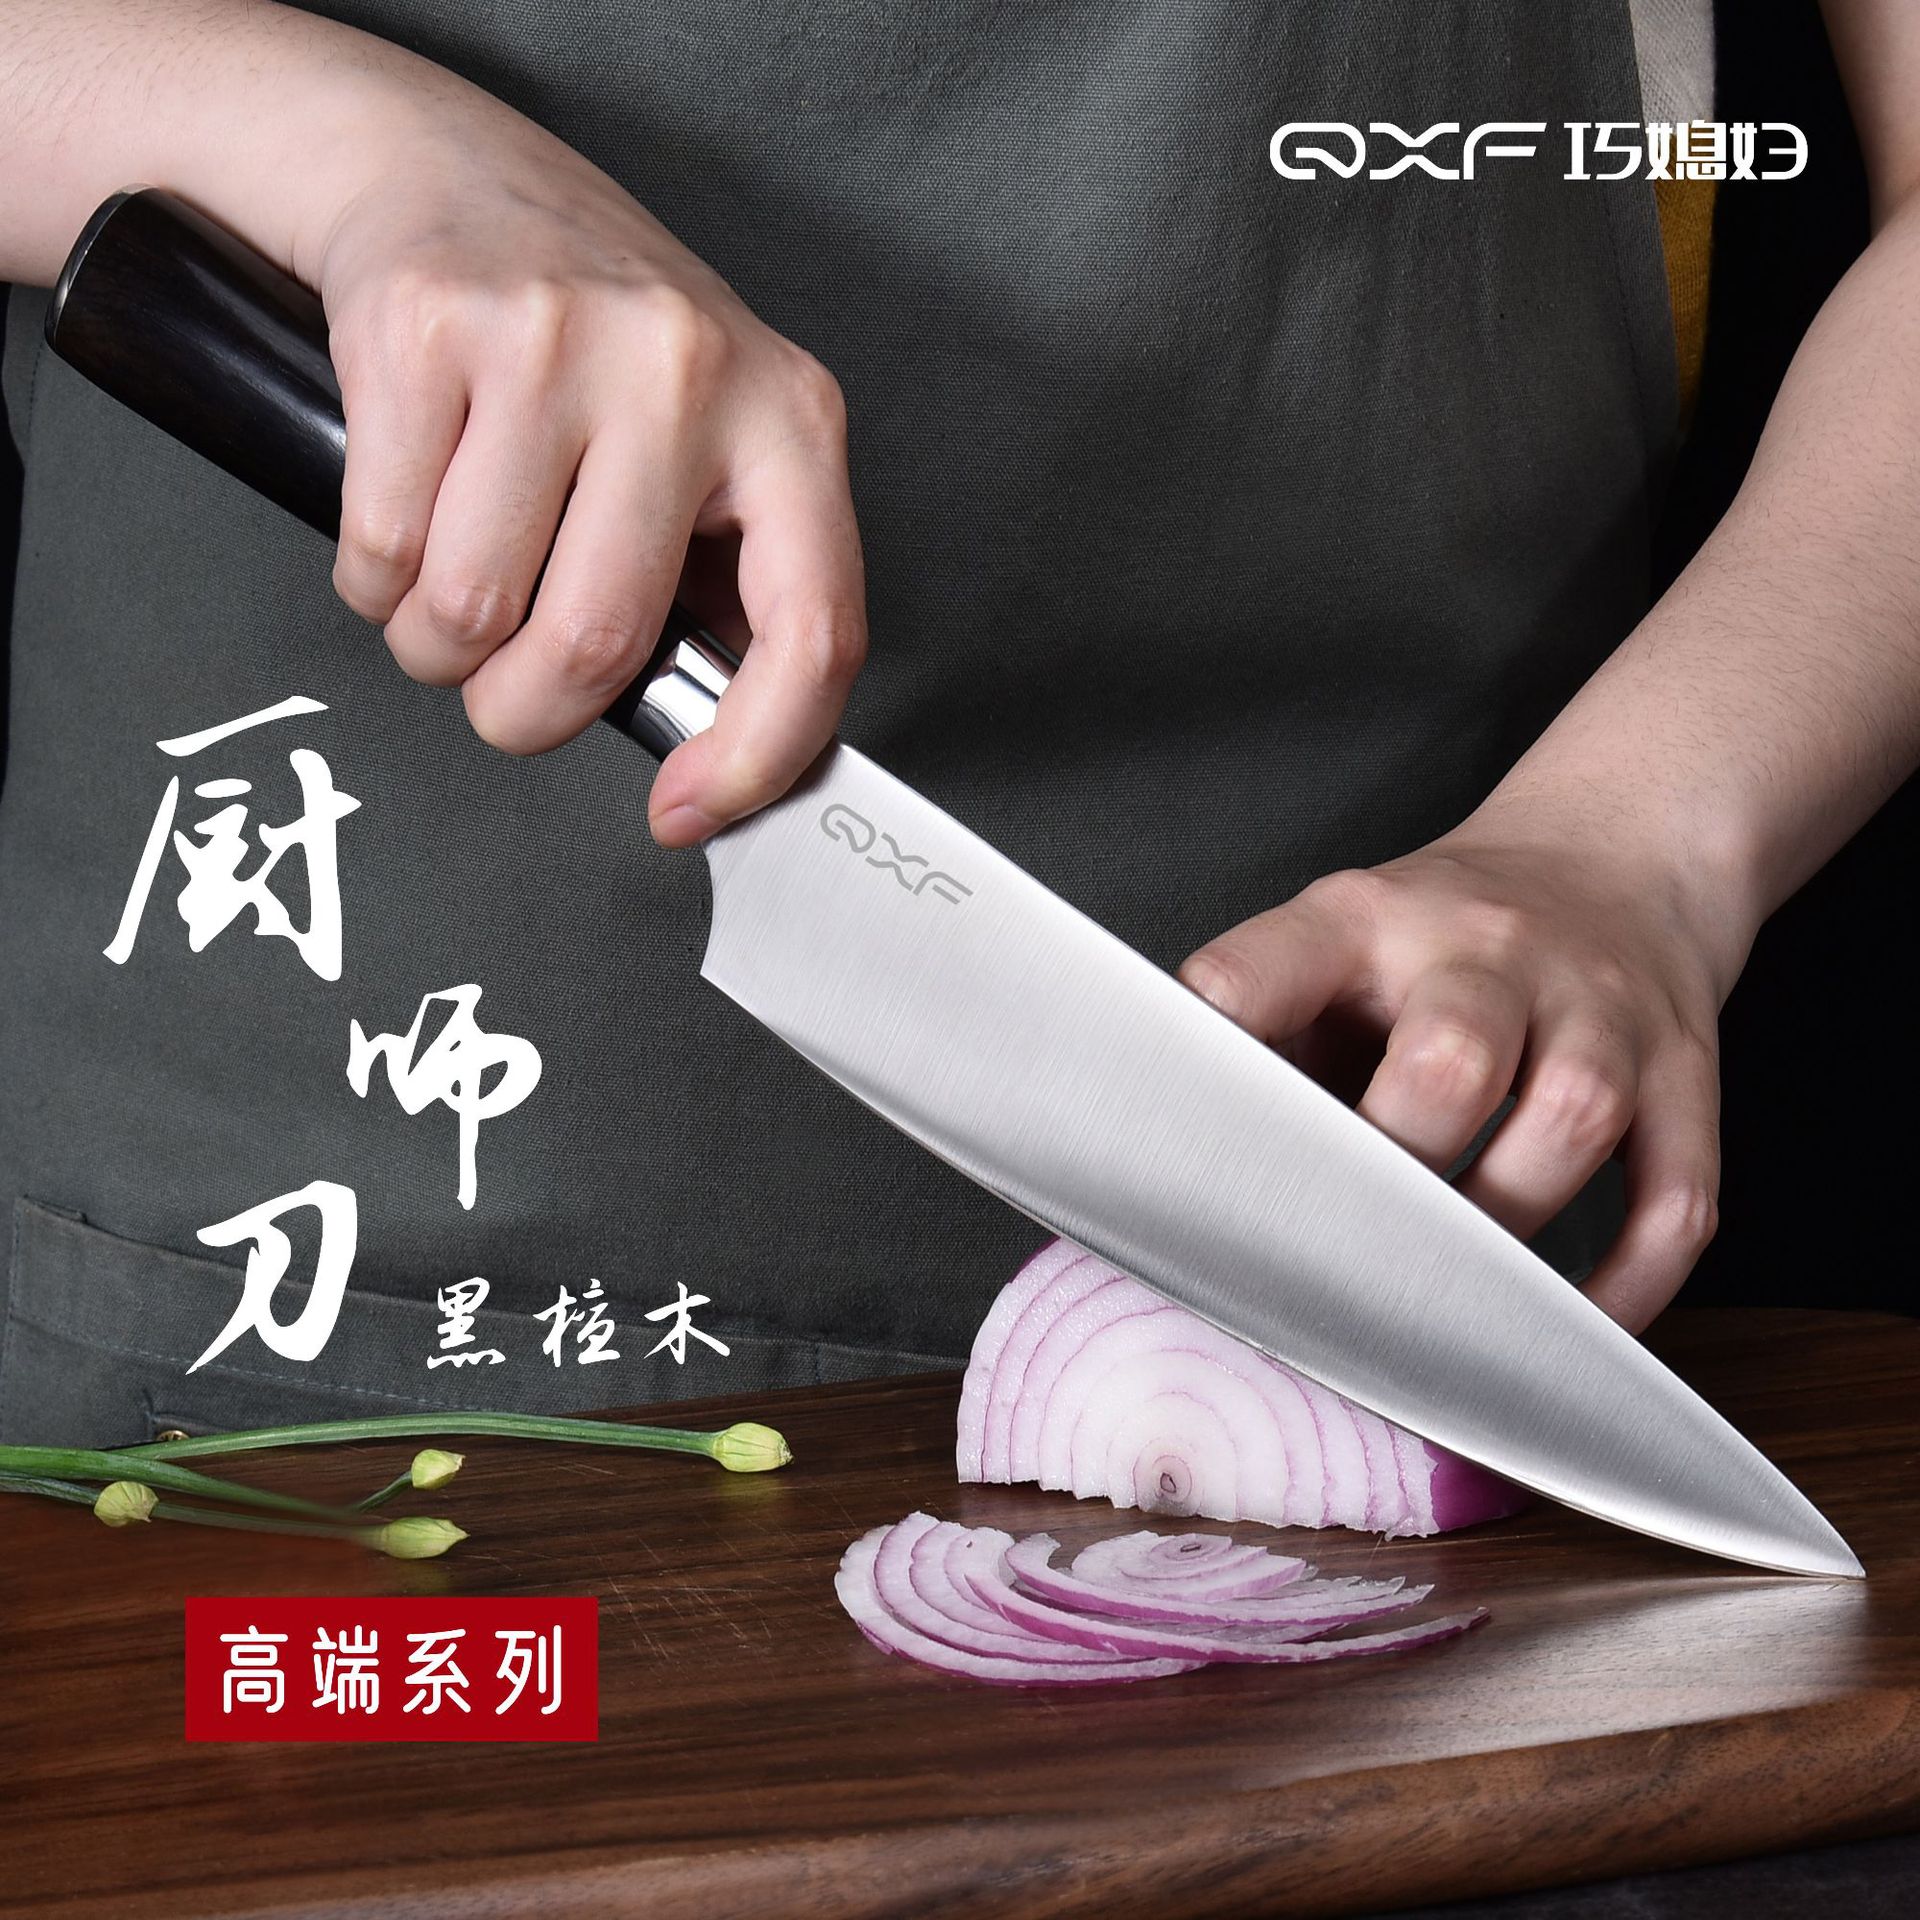 A wife Foreign trade Selling High-end customized Ebony Handle 5Cr15MoV Stainless steel major household Chef Knife